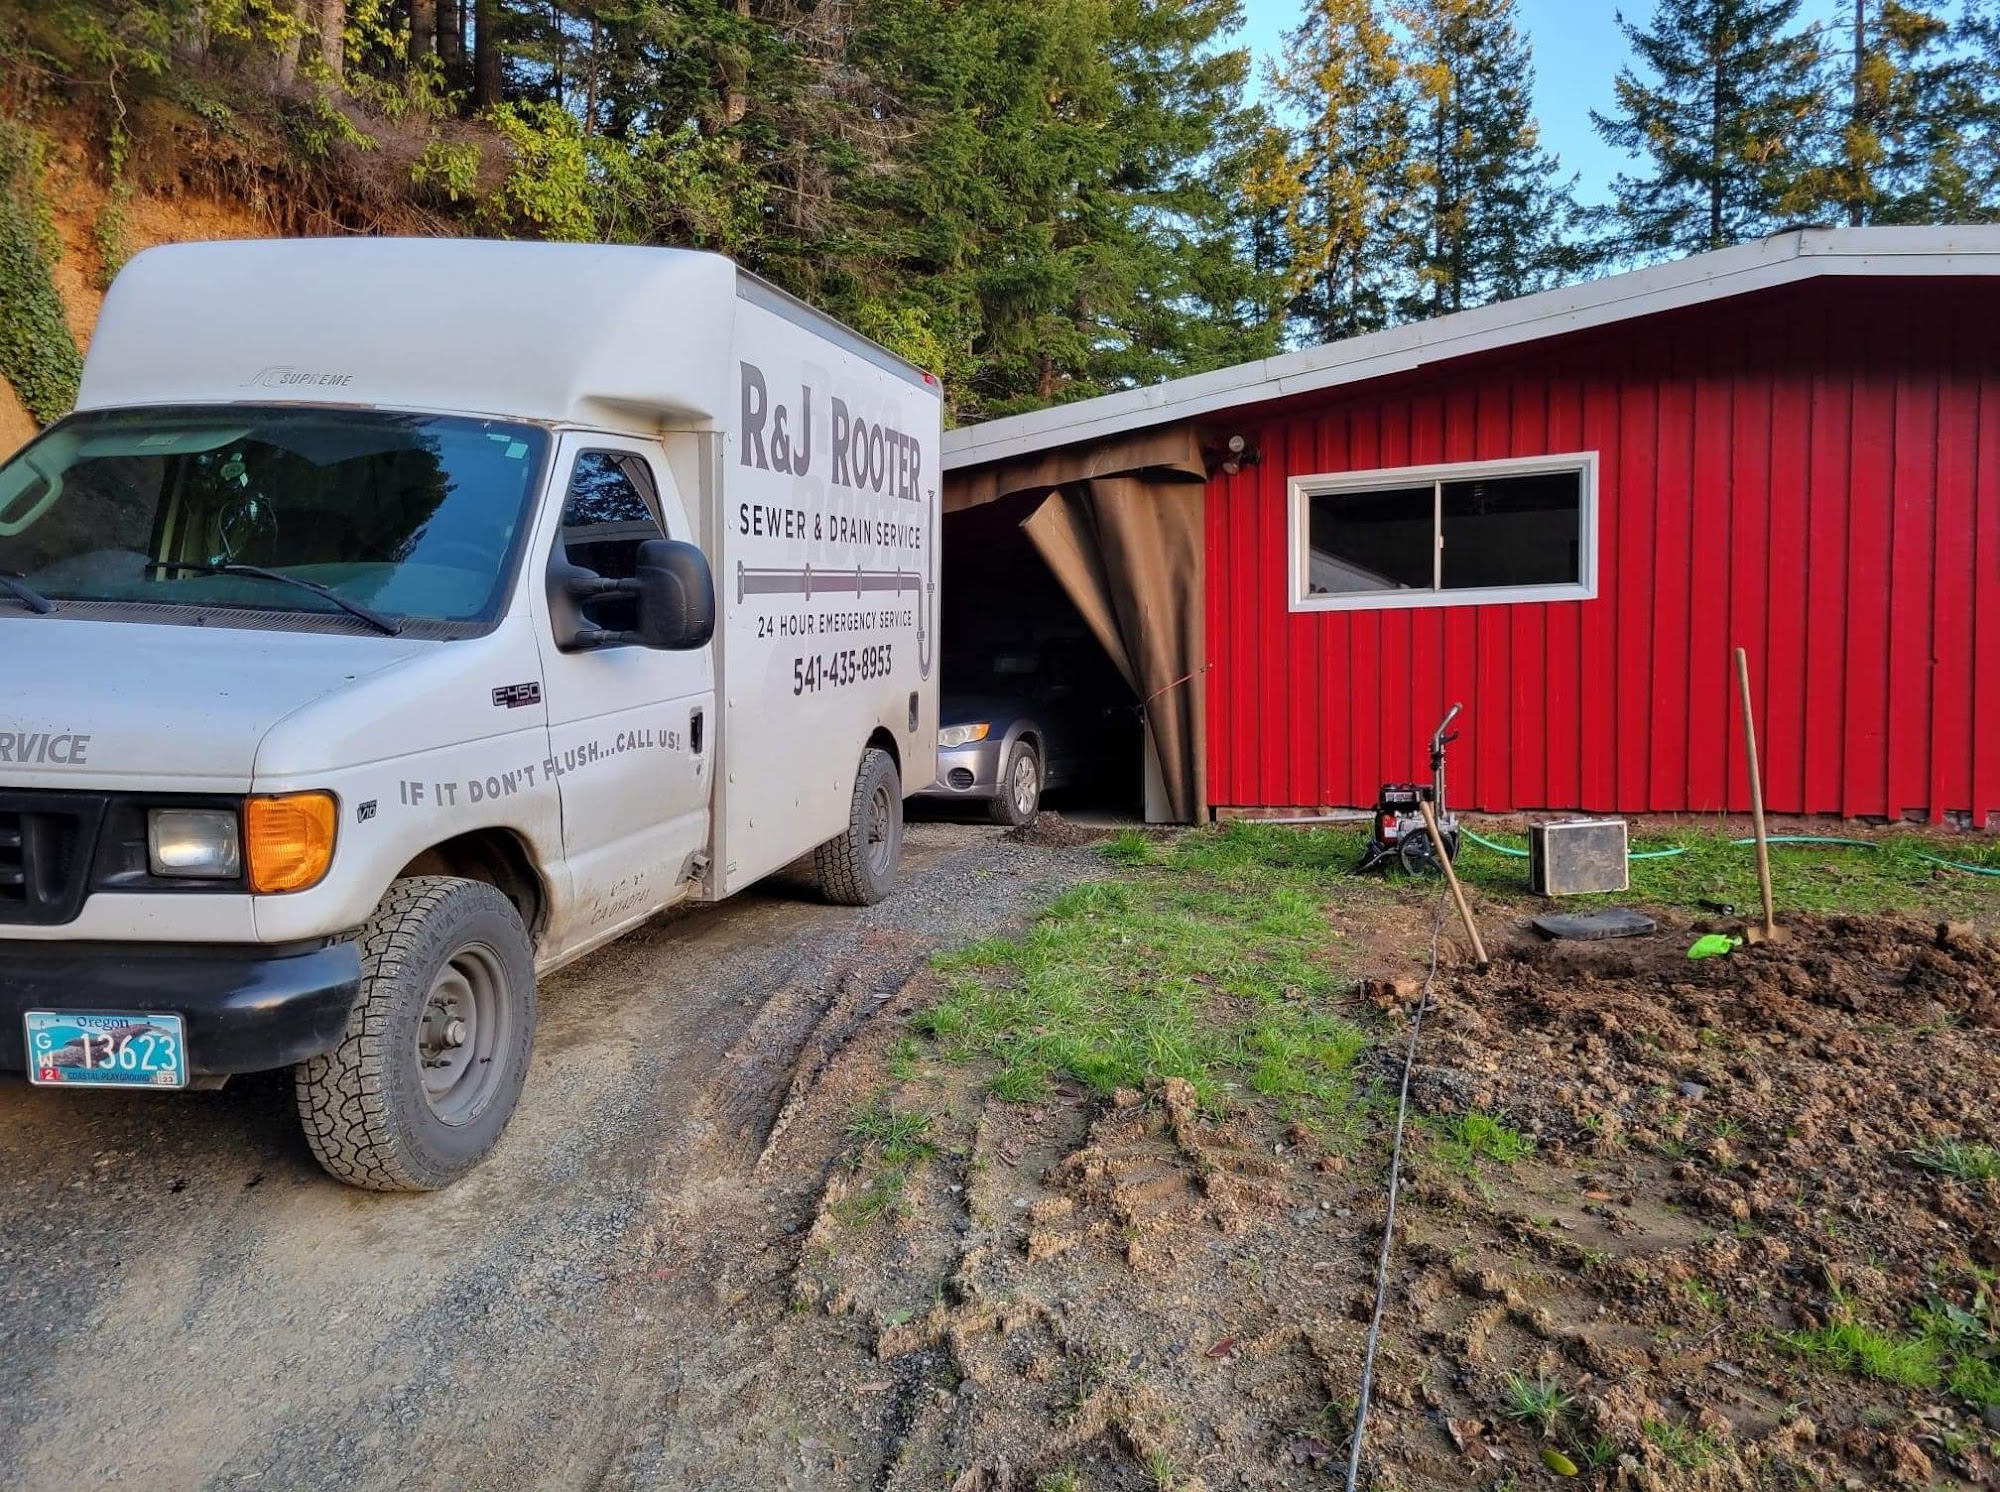 R&J Rooter- Sewer and Drain Service 1611 Virginia Ave Box 503, North Bend Oregon 97459